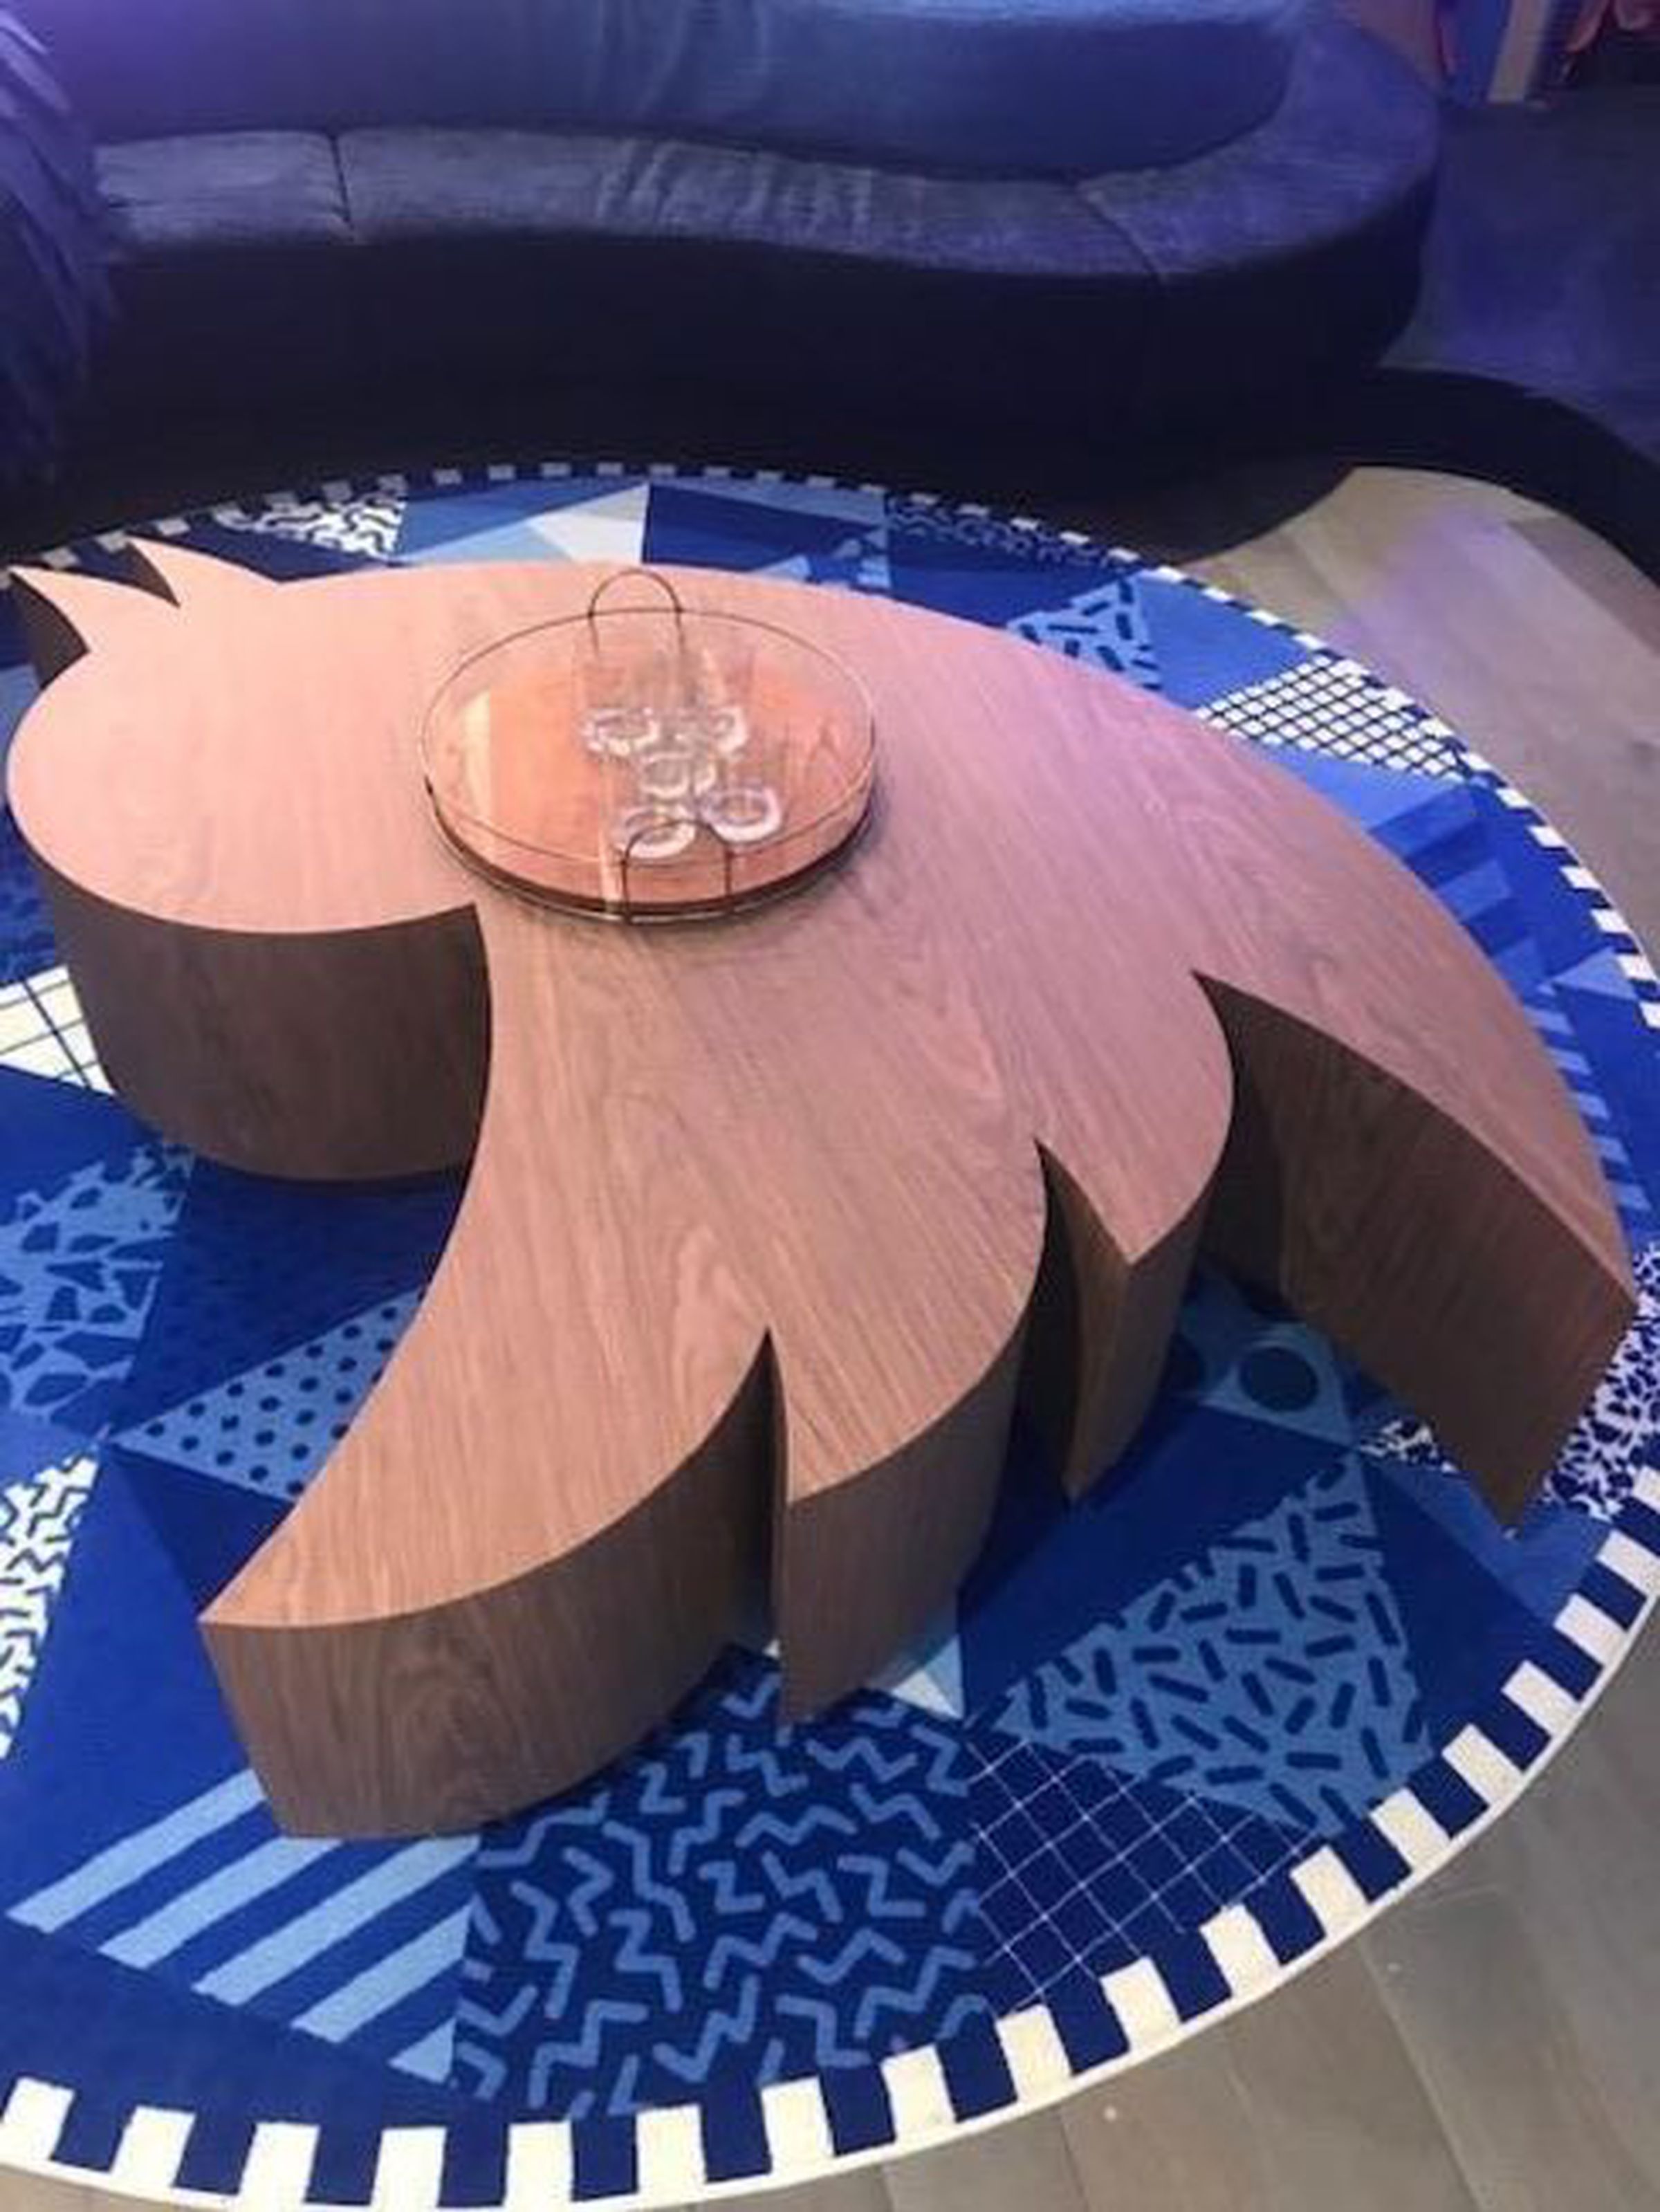 An image of a listing from X’s Twitter rebranding auction showing bird-themed art and furniture.